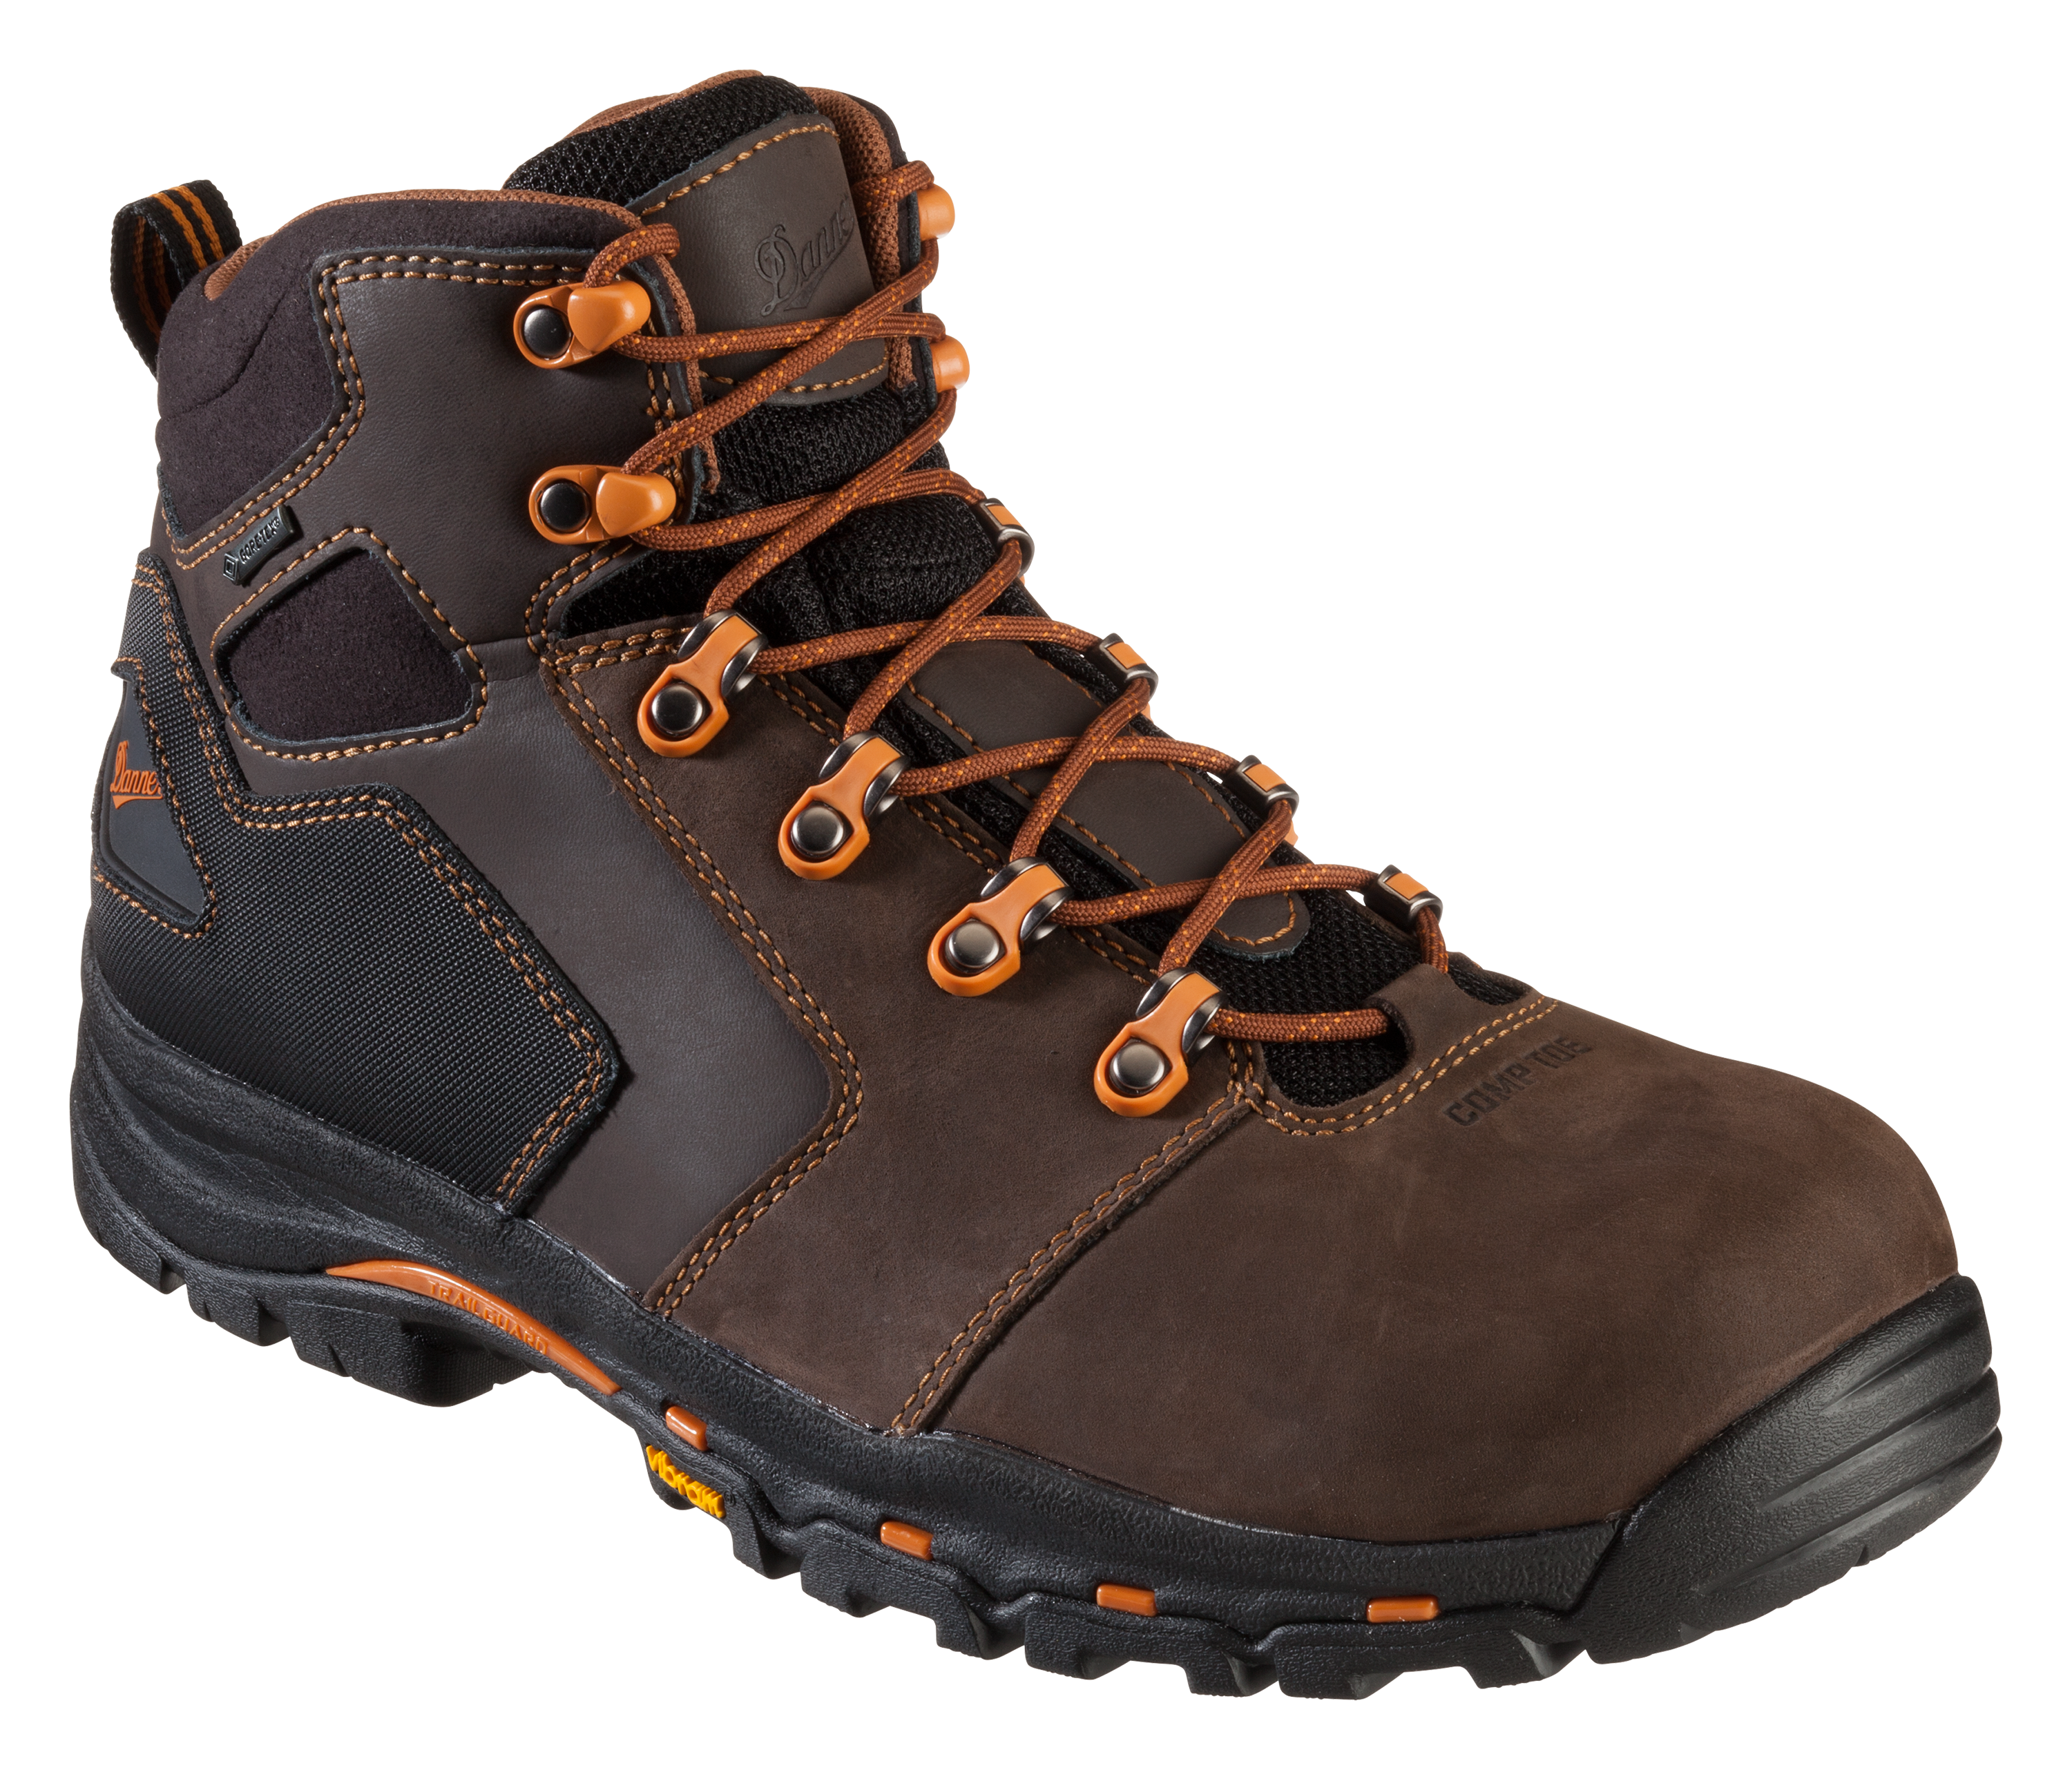 Danner Vicious GORE-TEX Non-Metallic Safety Toe Work Boots for Men - Brown - 12M